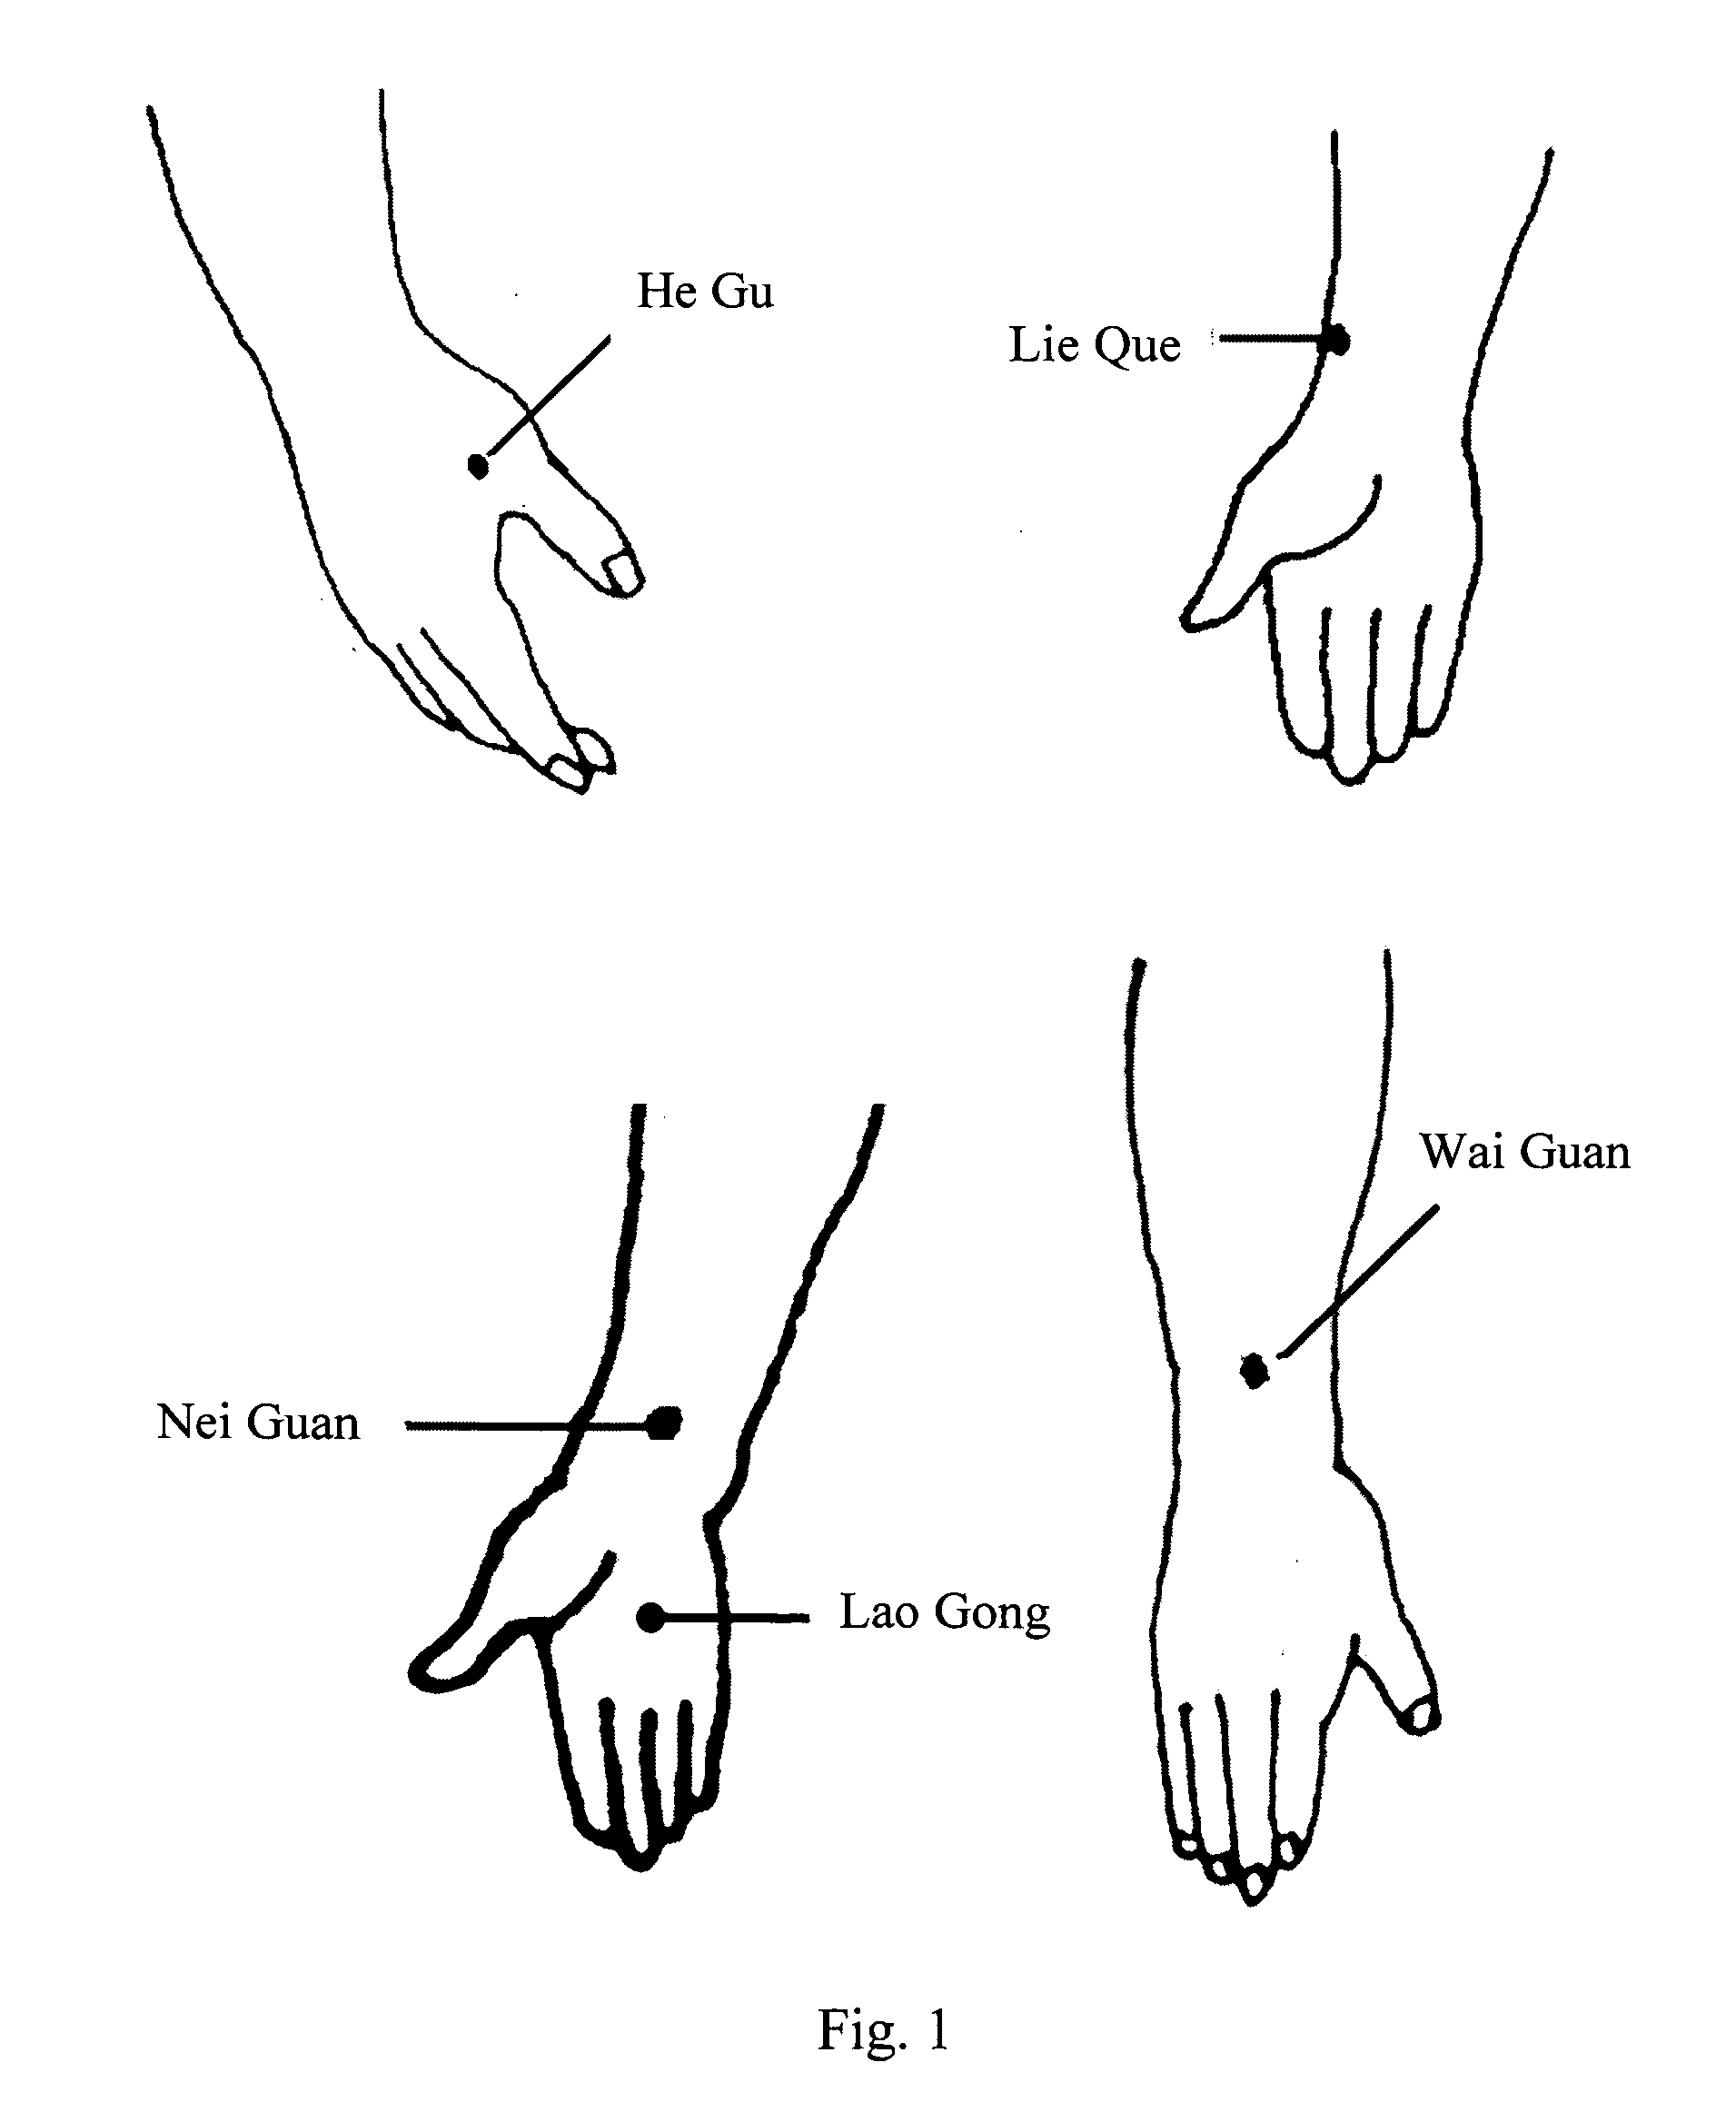 Portable therapeutic device and method for pain relief